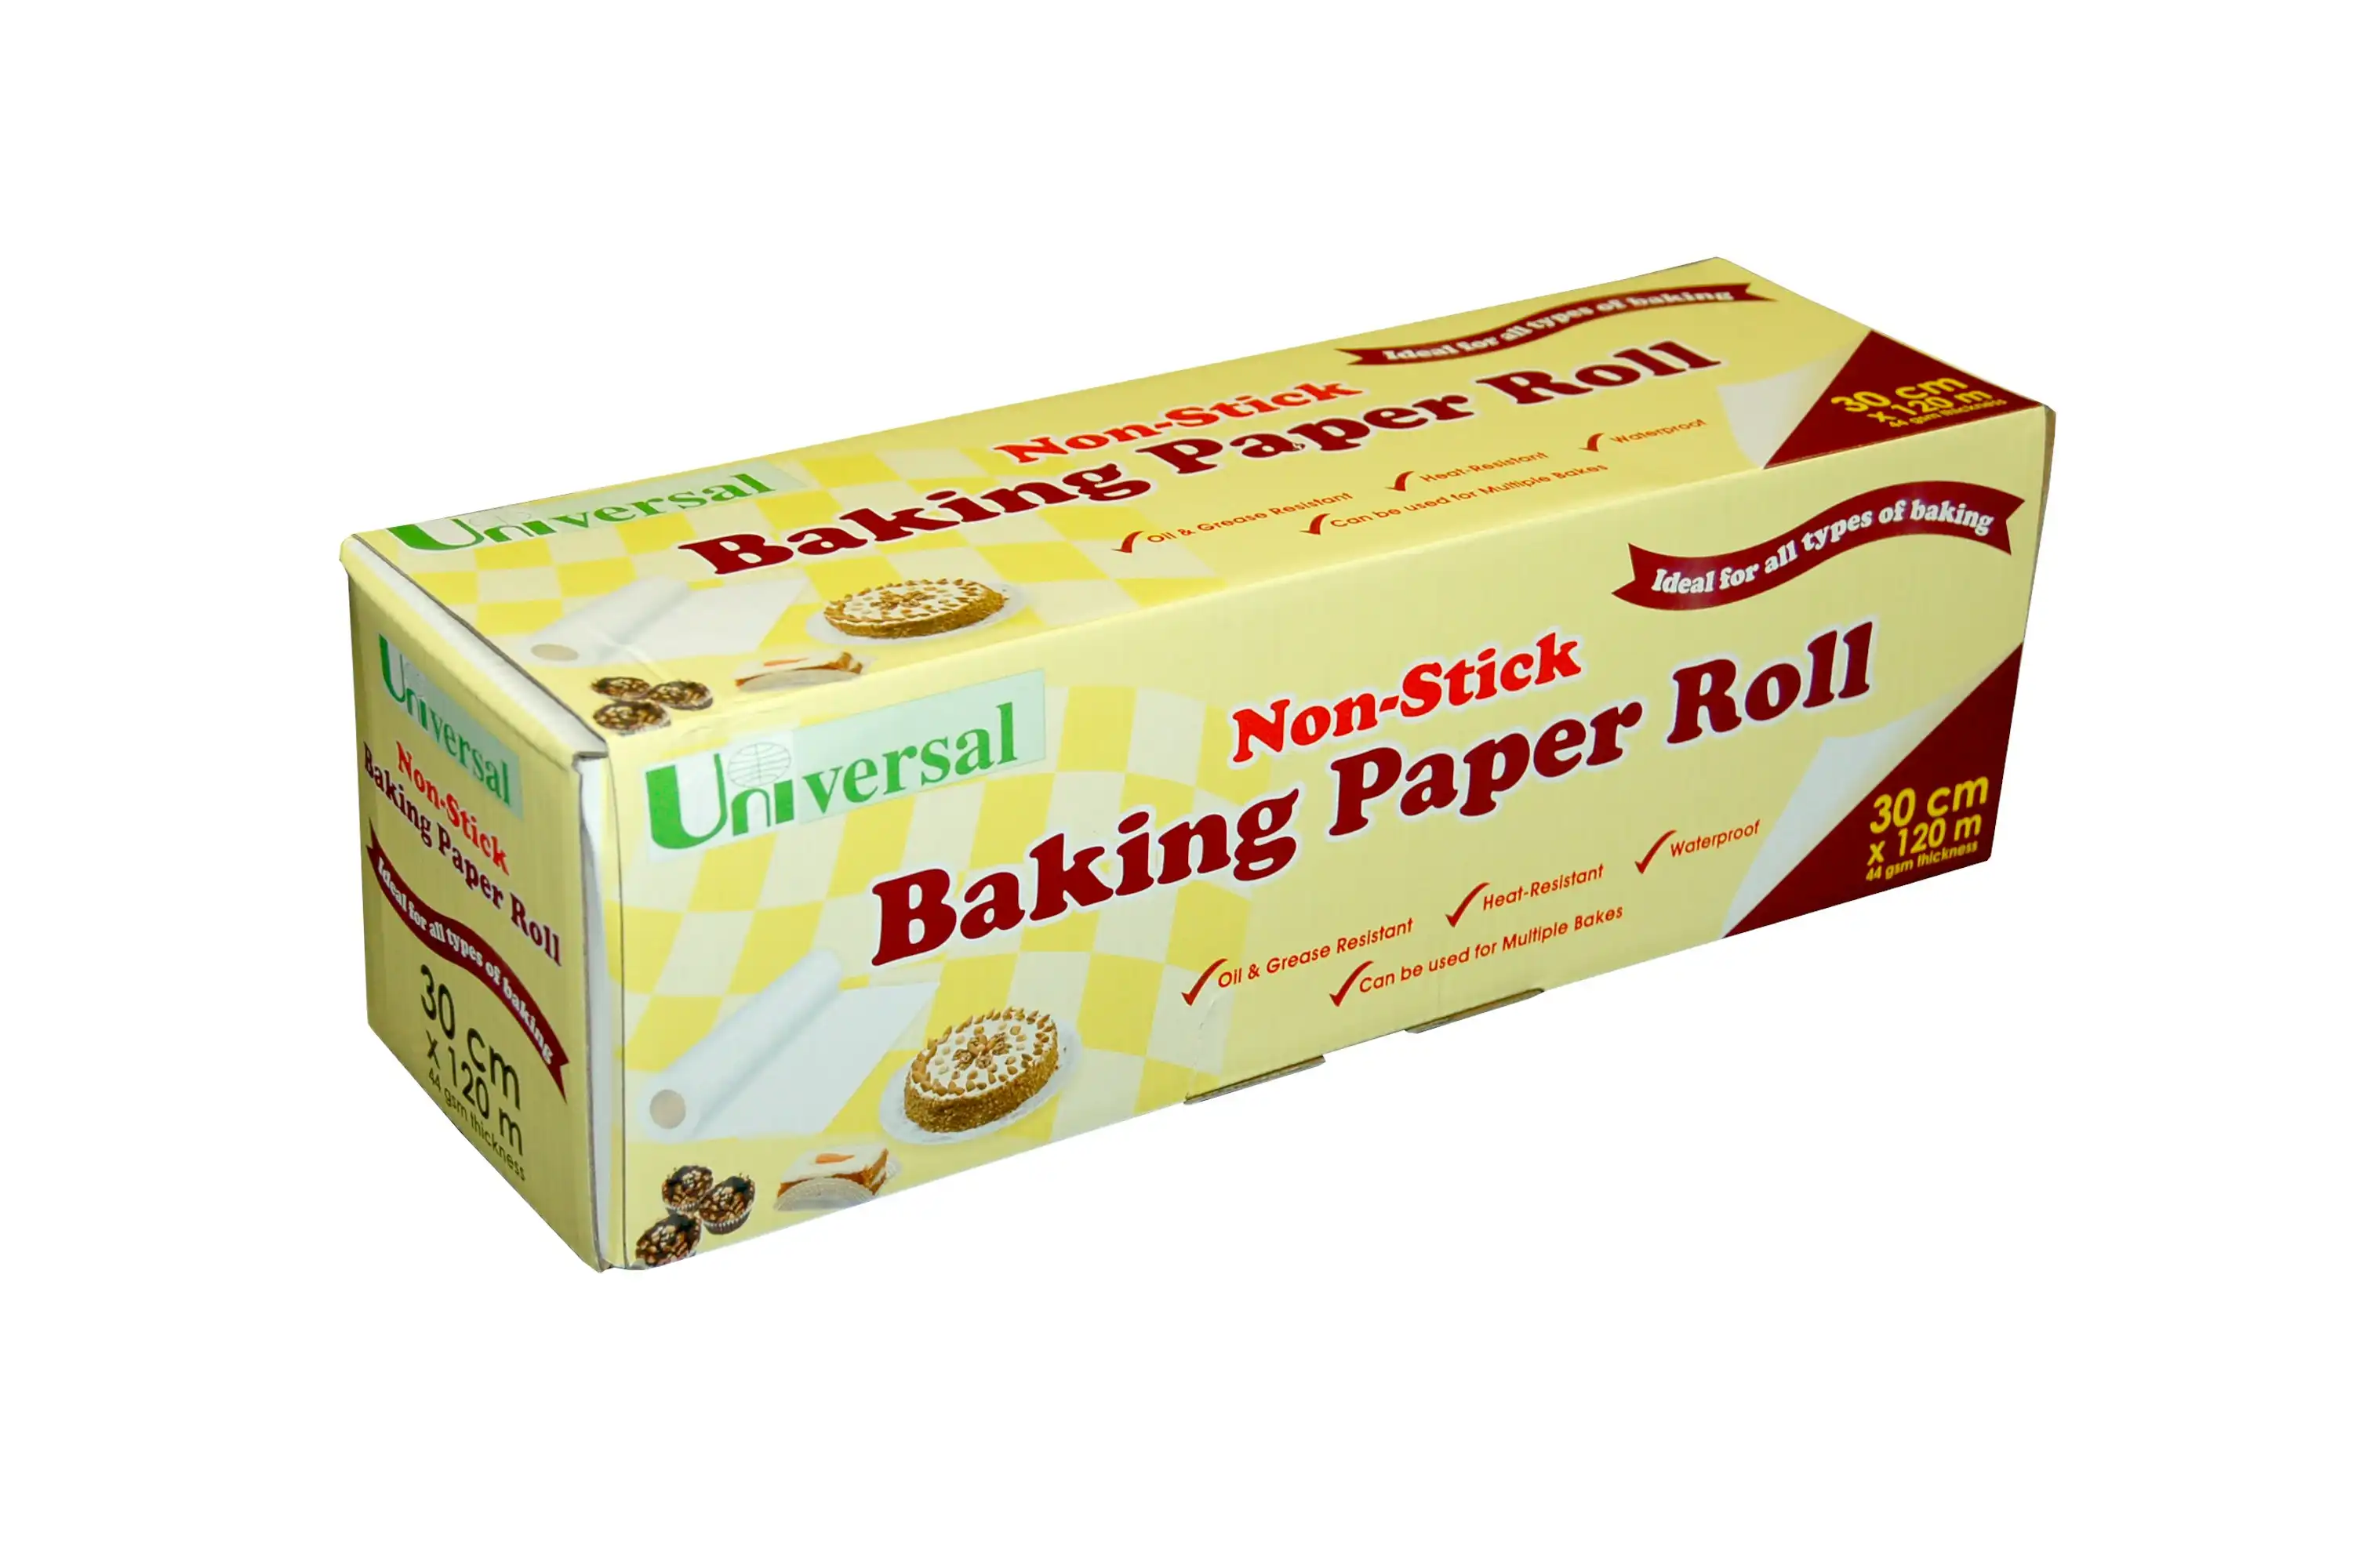 Universal Biodegradable Baking Paper with Metal Cutter 44GSM 30cm x 120m 4 Carton